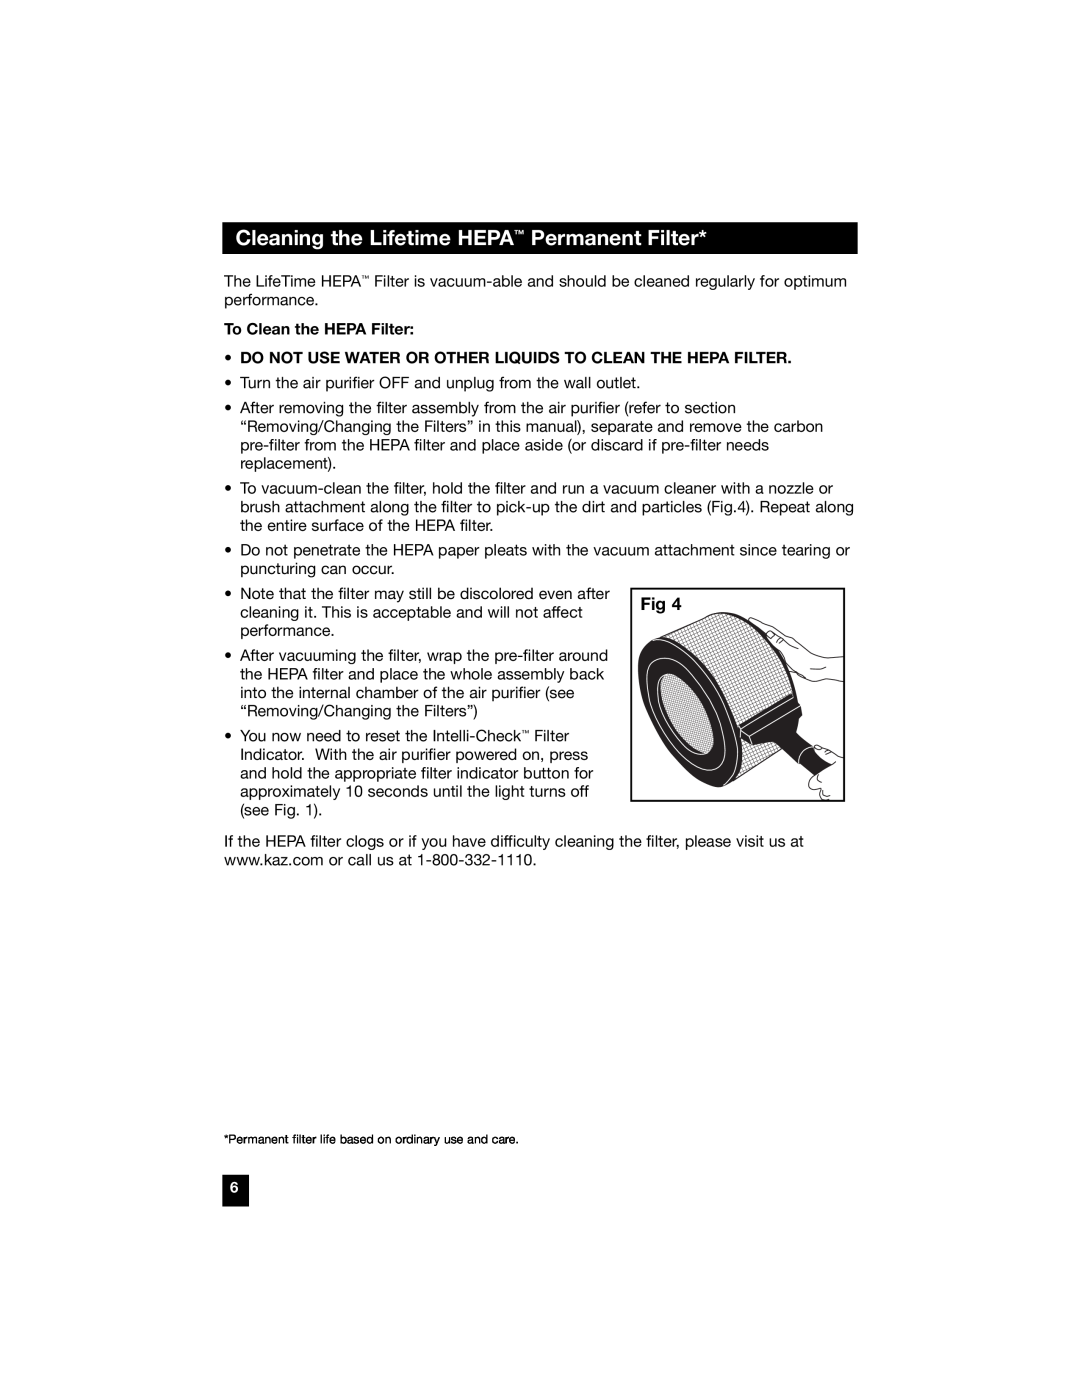 Honeywell 18155 owner manual Cleaning the Lifetime HEPA Permanent Filter, To Clean the HEPA Filter 